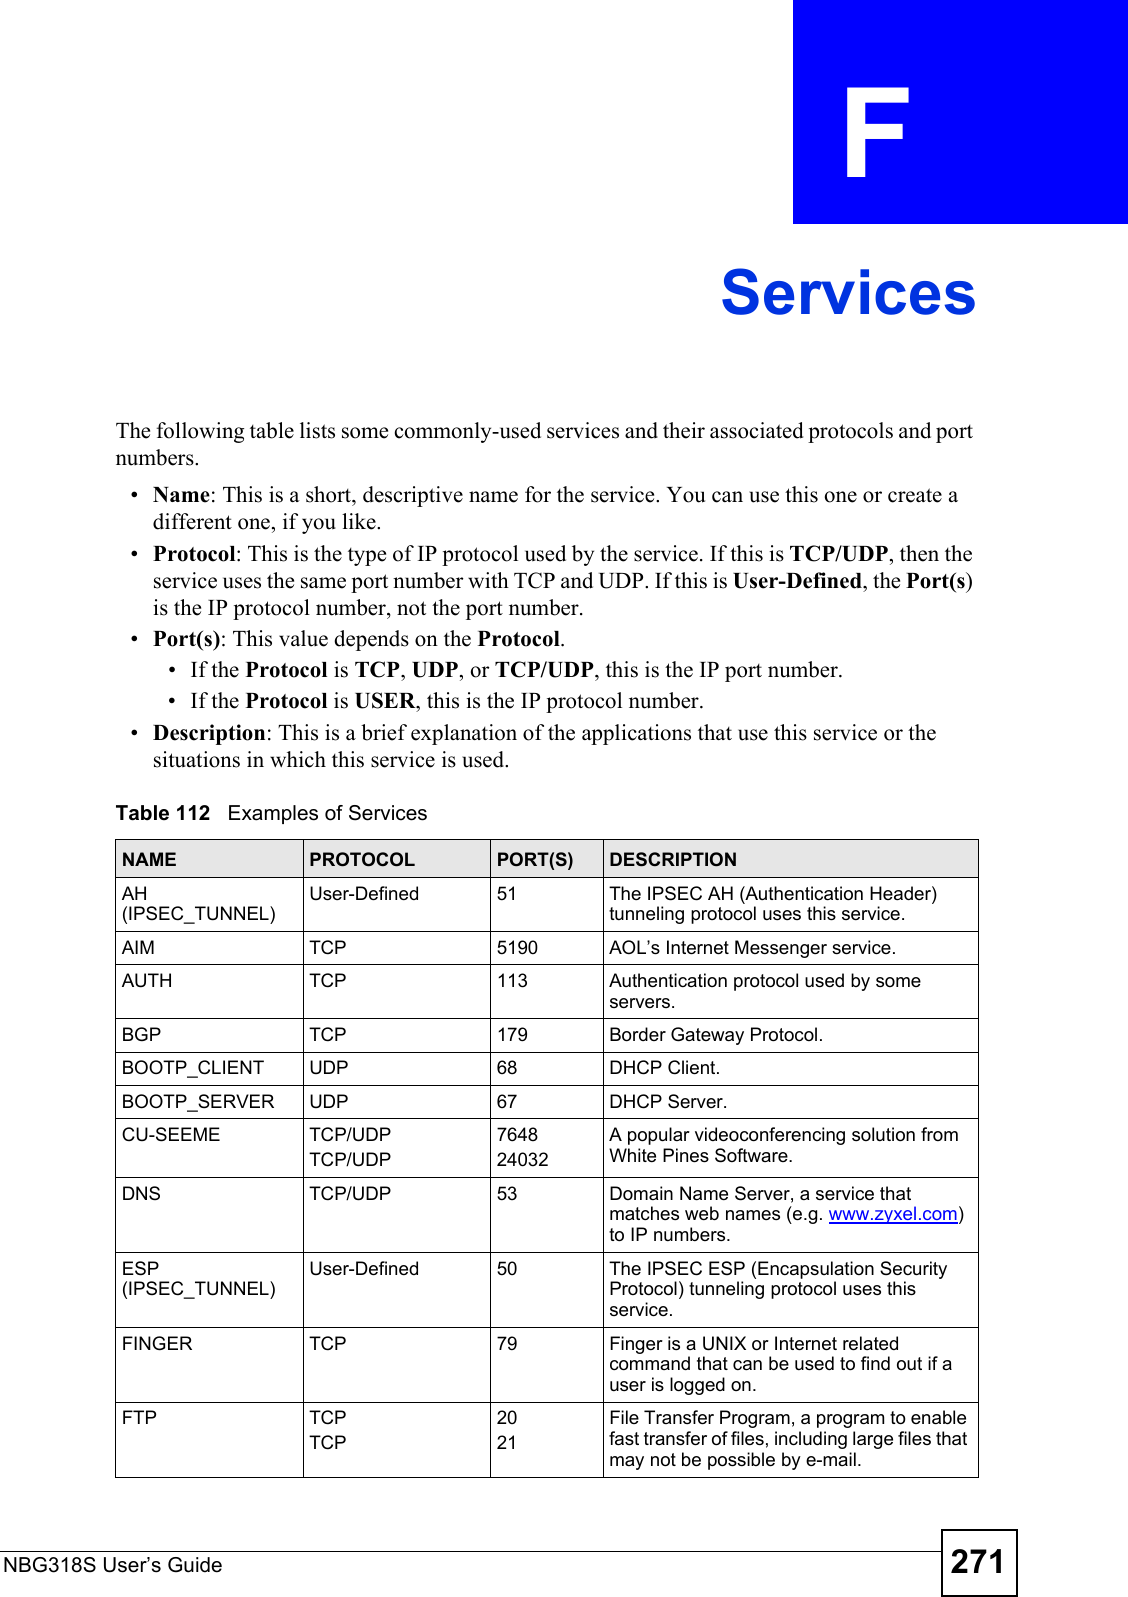 NBG318S User’s Guide 271APPENDIX  F ServicesThe following table lists some commonly-used services and their associated protocols and port numbers.•Name: This is a short, descriptive name for the service. You can use this one or create a different one, if you like.•Protocol: This is the type of IP protocol used by the service. If this is TCP/UDP, then the service uses the same port number with TCP and UDP. If this is User-Defined, the Port(s) is the IP protocol number, not the port number.•Port(s): This value depends on the Protocol.• If the Protocol is TCP, UDP, or TCP/UDP, this is the IP port number.• If the Protocol is USER, this is the IP protocol number.•Description: This is a brief explanation of the applications that use this service or the situations in which this service is used.Table 112   Examples of ServicesNAME PROTOCOL PORT(S) DESCRIPTIONAH (IPSEC_TUNNEL)User-Defined 51 The IPSEC AH (Authentication Header) tunneling protocol uses this service.AIM TCP 5190 AOL’s Internet Messenger service.AUTH TCP 113 Authentication protocol used by some servers.BGP TCP 179 Border Gateway Protocol.BOOTP_CLIENT UDP 68 DHCP Client.BOOTP_SERVER UDP 67 DHCP Server.CU-SEEME TCP/UDPTCP/UDP 764824032A popular videoconferencing solution from White Pines Software.DNS TCP/UDP 53 Domain Name Server, a service that matches web names (e.g. www.zyxel.com) to IP numbers.ESP (IPSEC_TUNNEL)User-Defined 50 The IPSEC ESP (Encapsulation Security Protocol) tunneling protocol uses this service.FINGER TCP 79 Finger is a UNIX or Internet related command that can be used to find out if a user is logged on.FTP TCPTCP2021File Transfer Program, a program to enable fast transfer of files, including large files that may not be possible by e-mail.